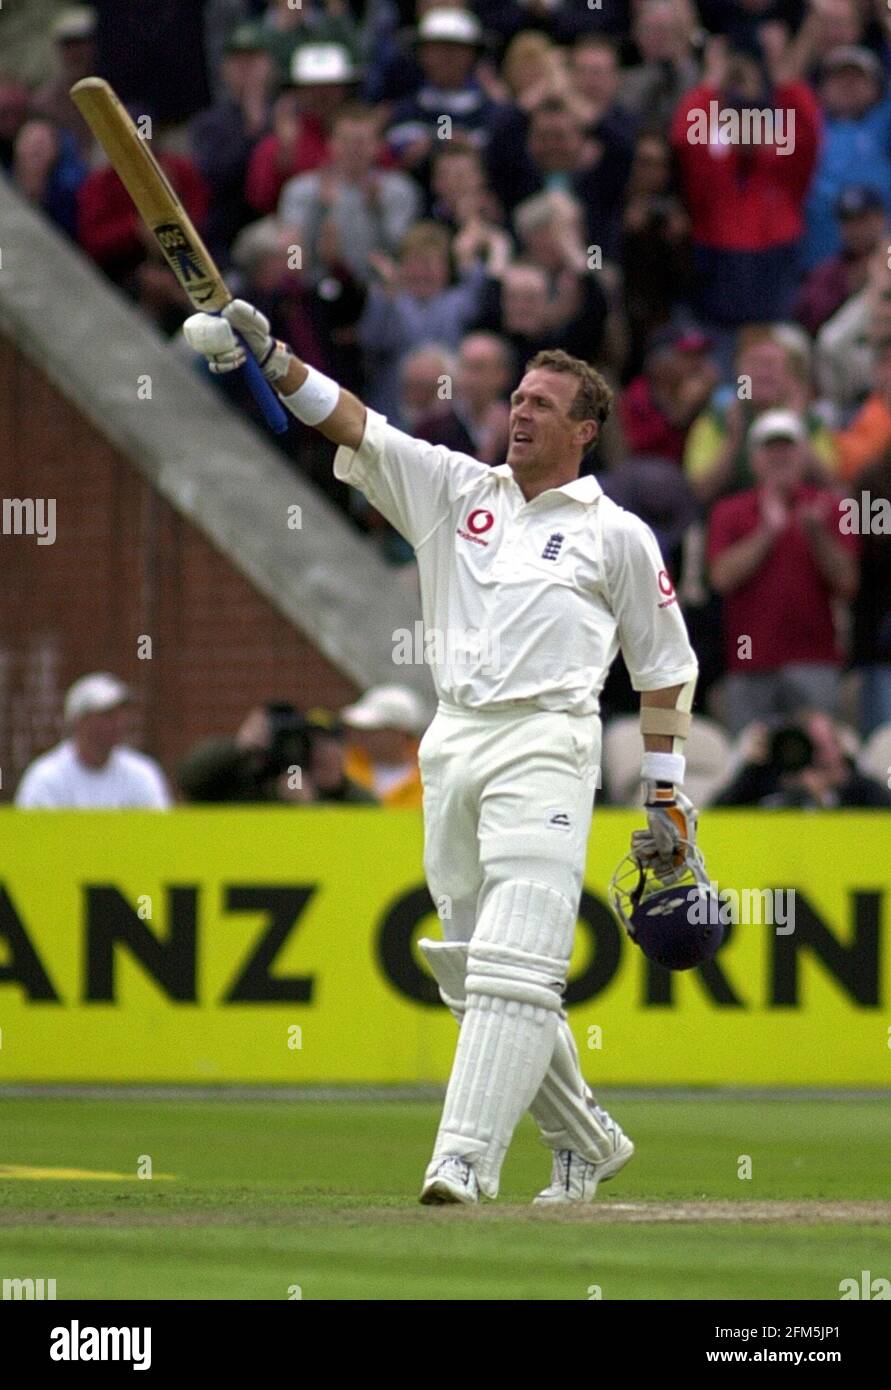 Alec Stewart Cricket Player of England, Aug 2000 raises his bat as he reaches 100 runs, during the match against the West Indies, on Day 2 of the Third Cornhill Test at Old Trafford Stock Photo